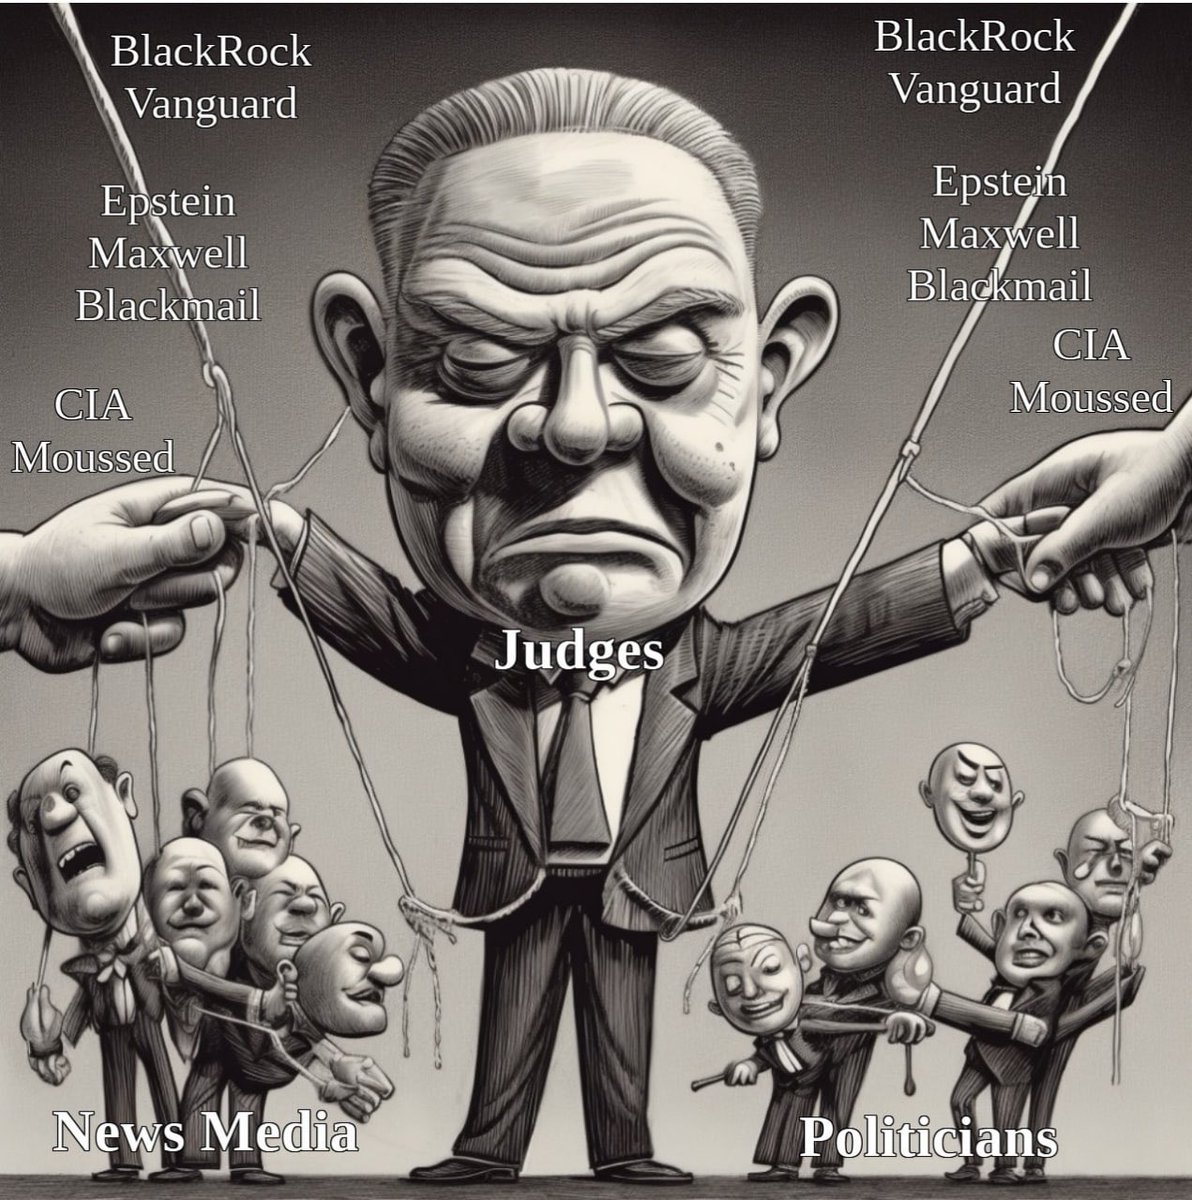 @EagleWings3578 @truthtomeCh @TCB583 Once BlackRock falls, we need the judiciary to clean house of their corrupt judges & attorneys. 
Unfortunately, our whole system has been compromised by elements of CIA & Mossad blackmail networks. 
#DefundTheDOJ